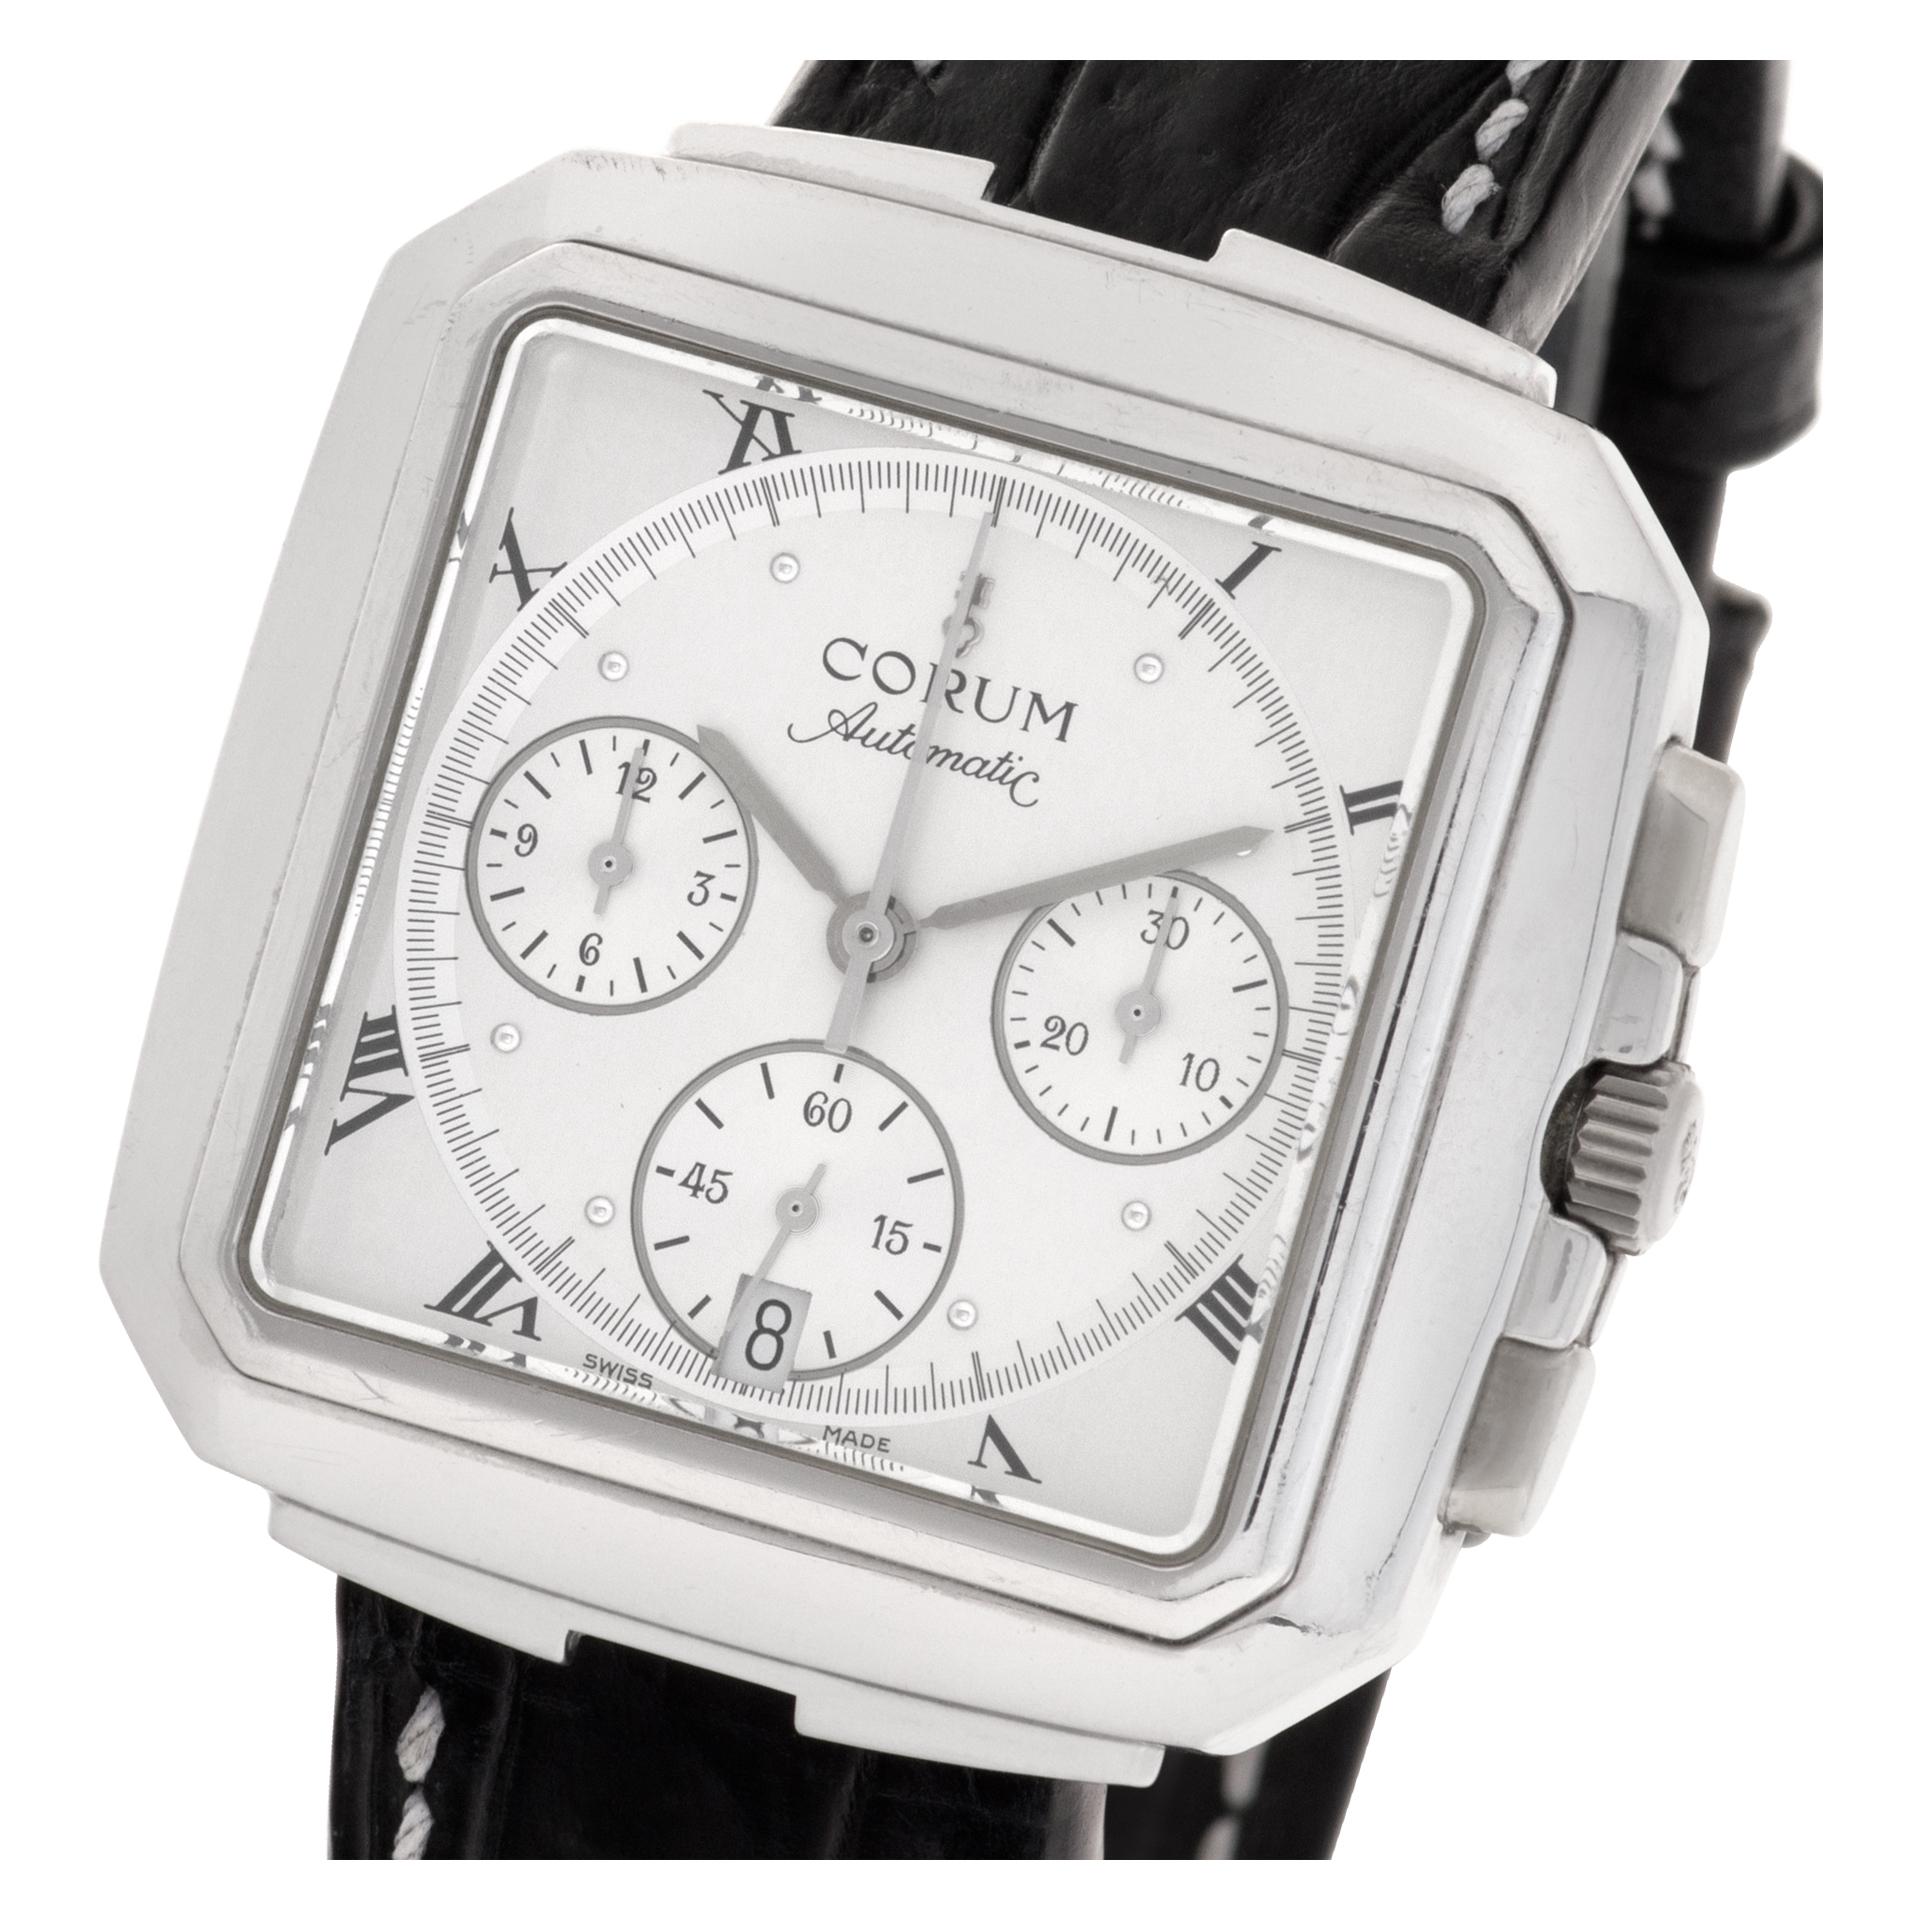 Corum Chronograph Ref. 296.121.70 Watch in Platinum, Auto w/ Subseconds For Sale 1